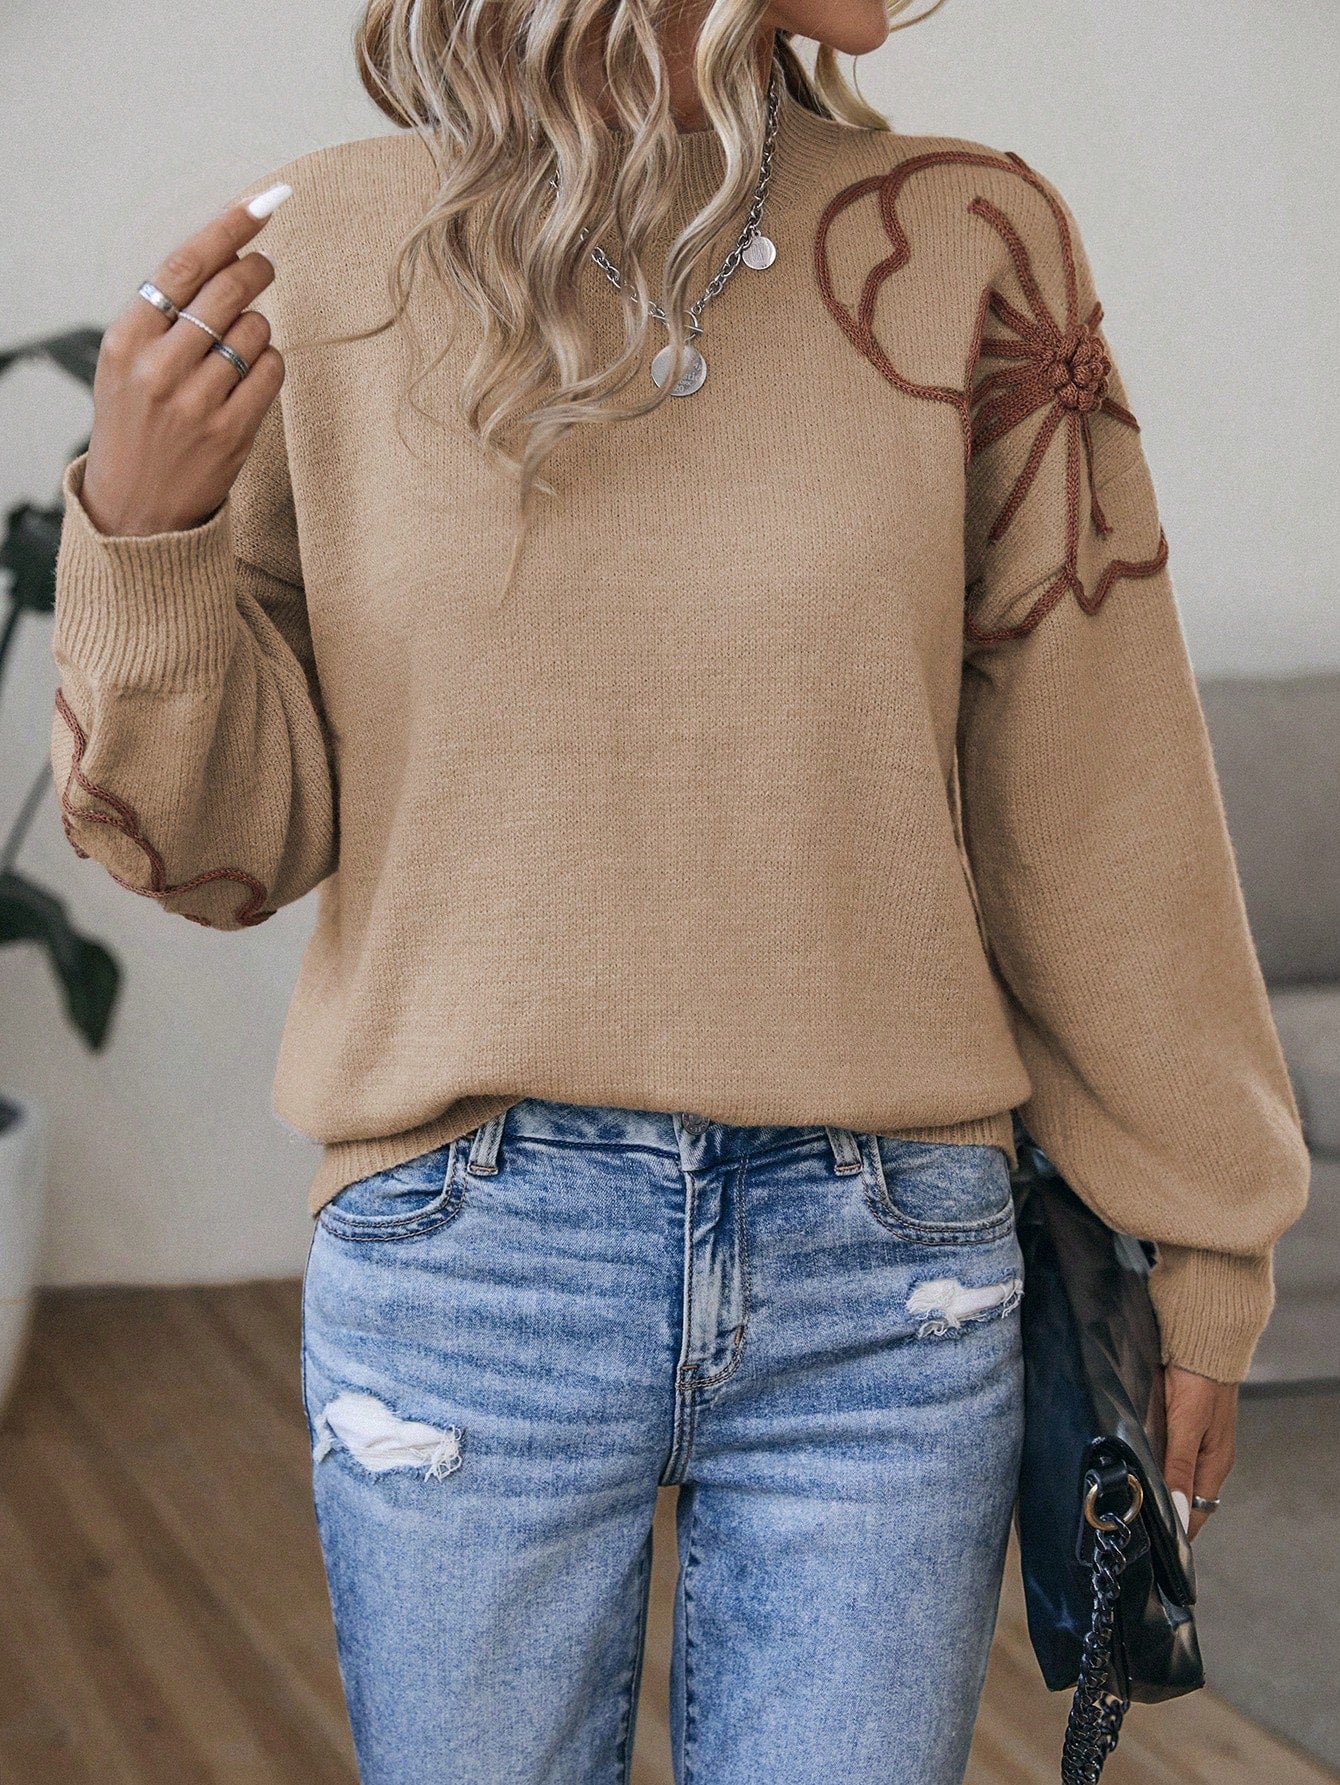 Floral Babe Sweater